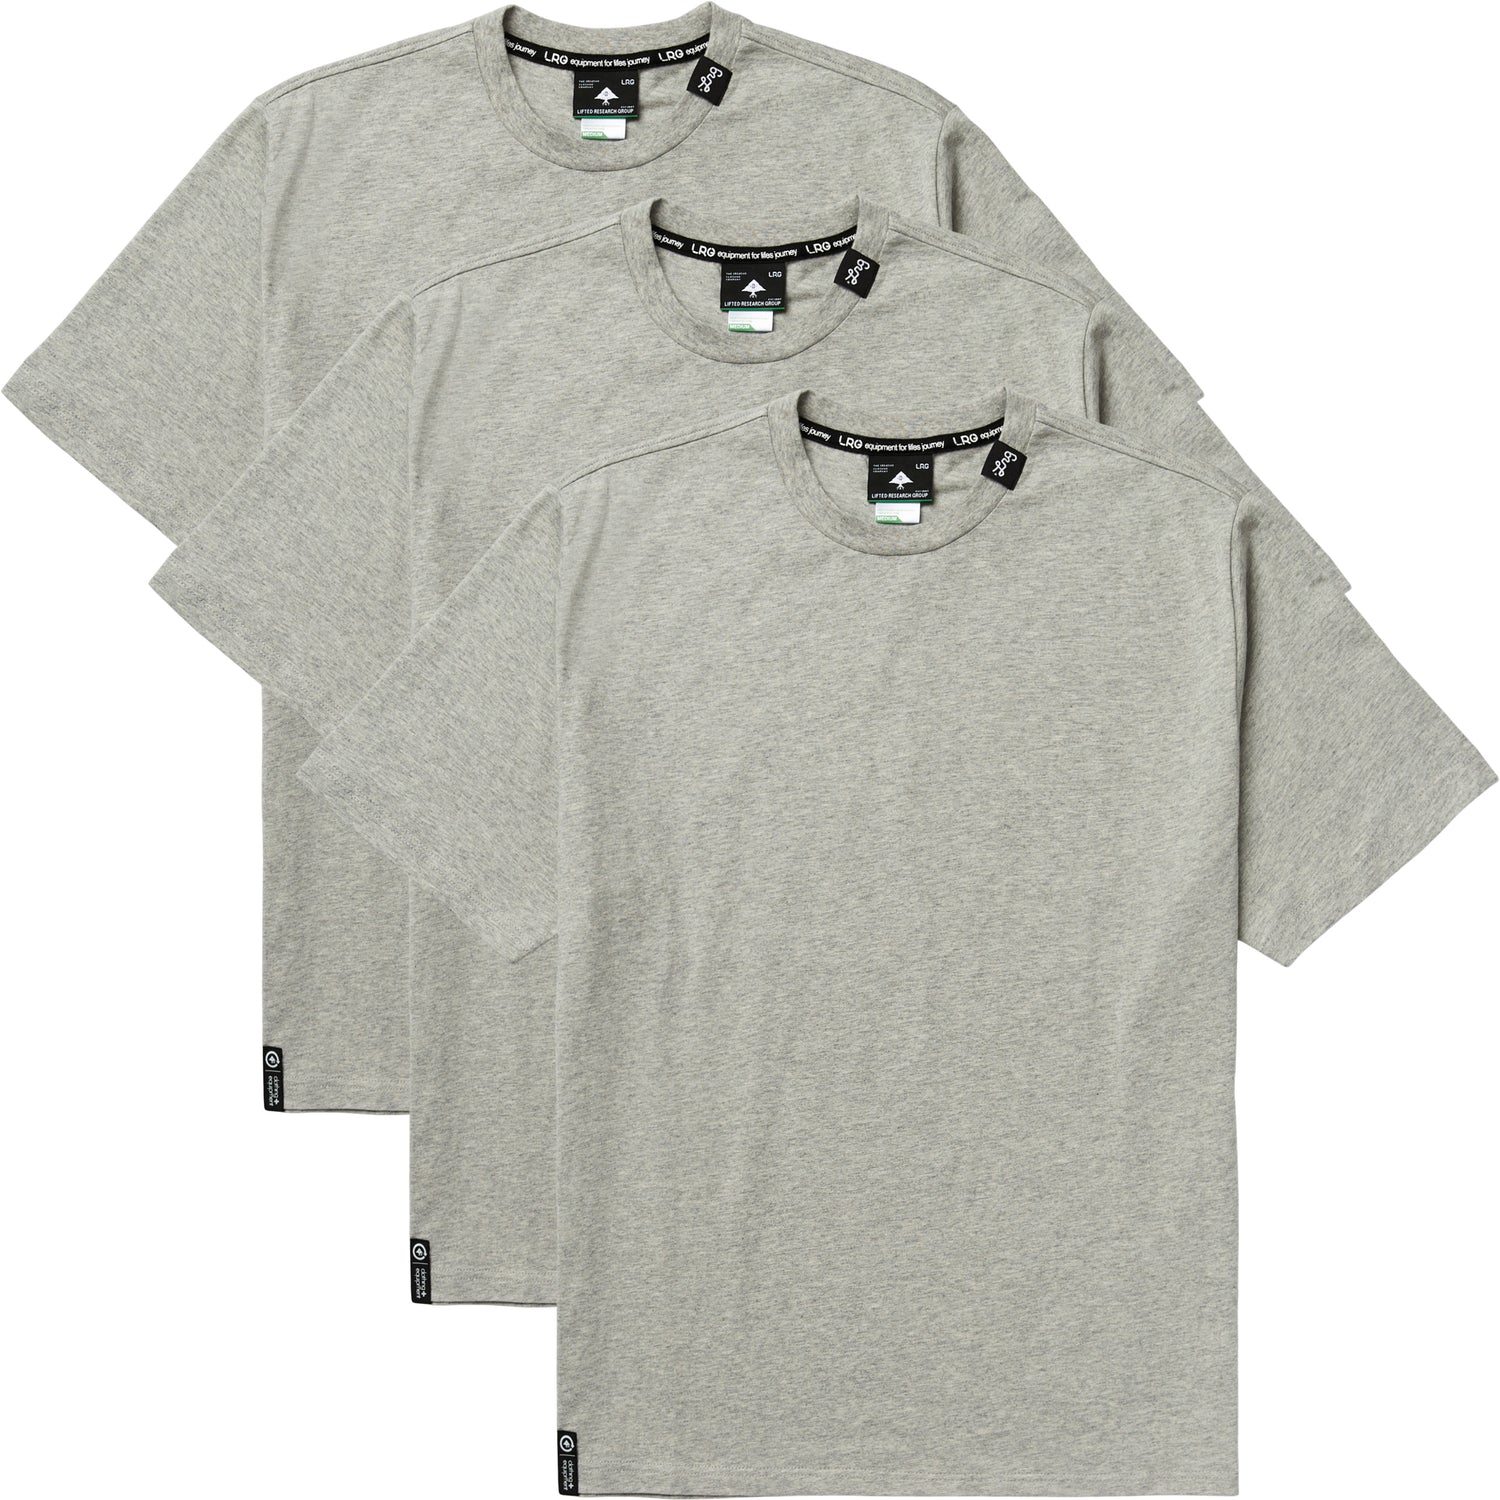 ROOTING DEEPLY KNIT TEES 3 PACK - HEATHER GREY